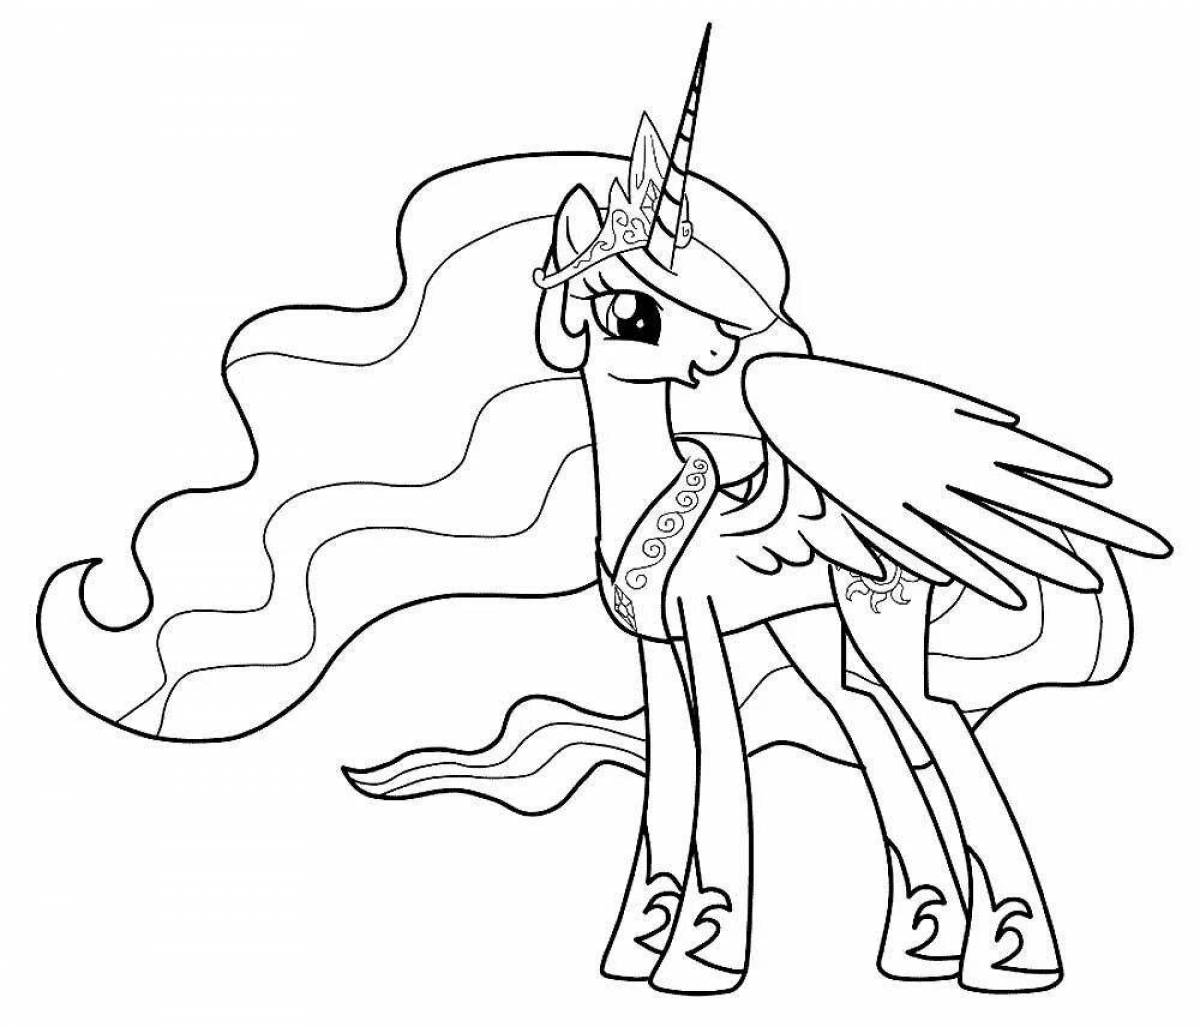 Lovely malital pony game coloring page